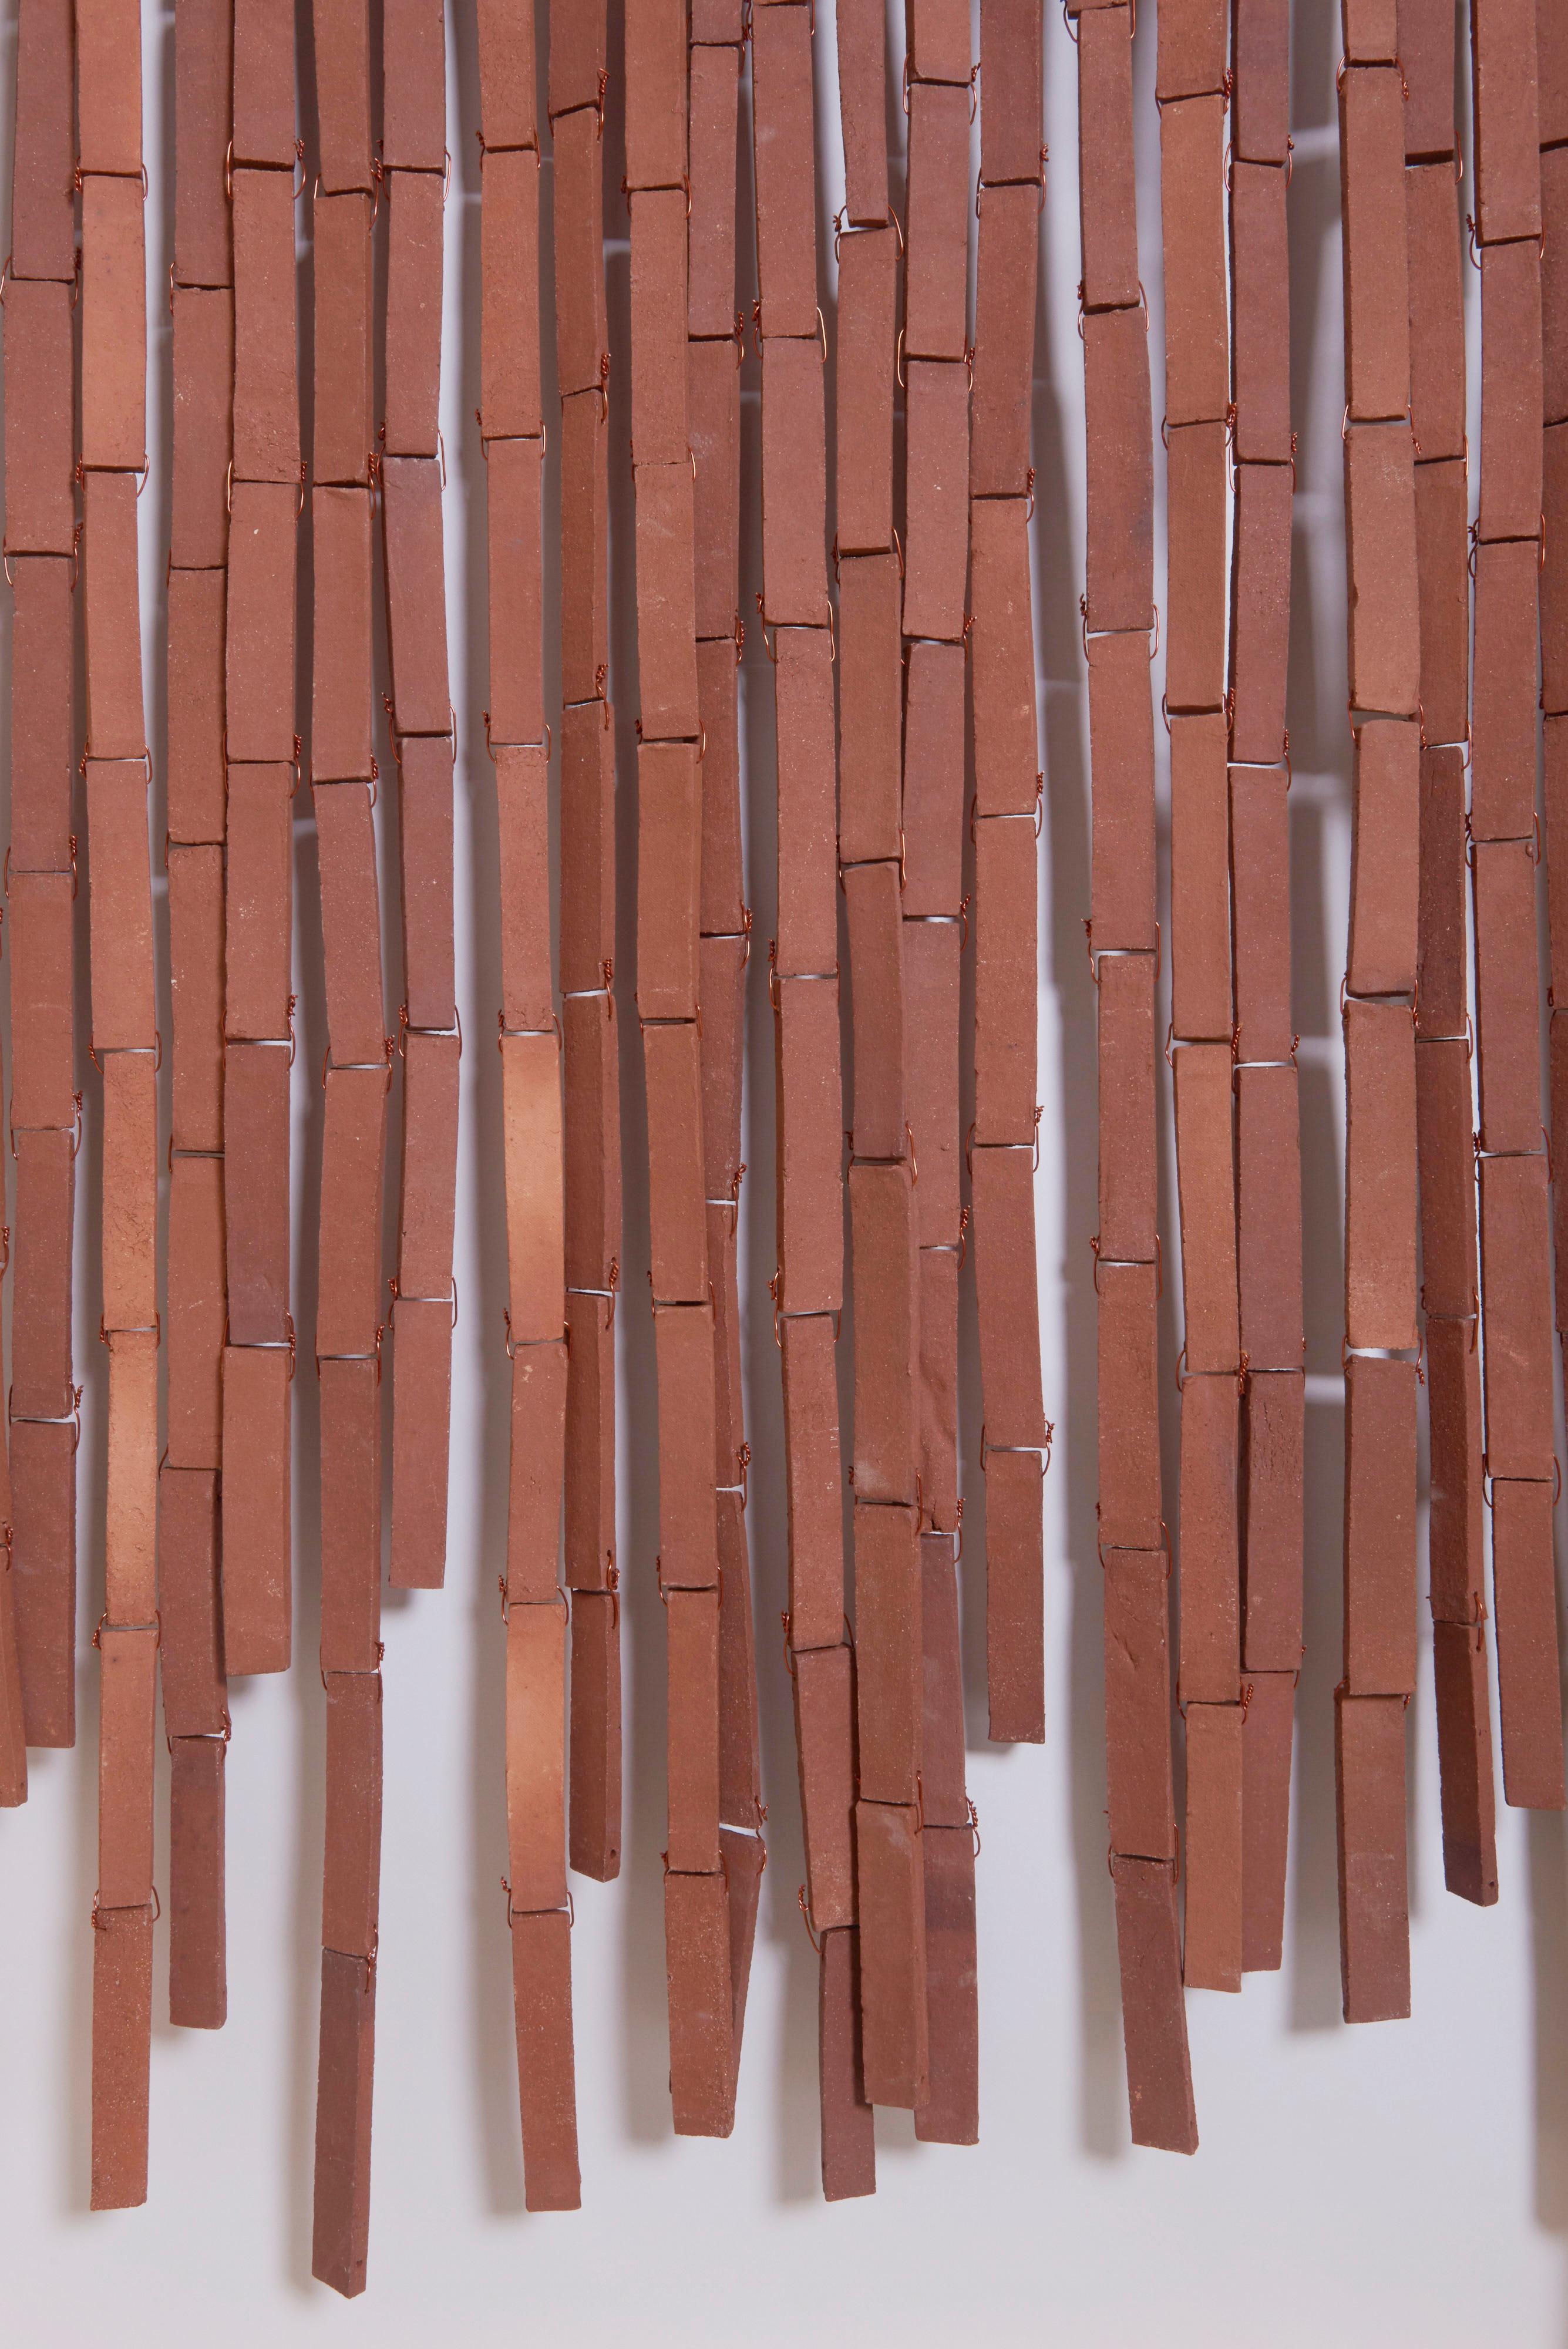 Stan Bitters sun screen made from strips of fired unglazed clay. Each strip is approximately 2 cm / 0.8 inch wide and they vary in length. The individual pieces are joined by copper wire. Chiming occurs when the unattached ends strike one another in